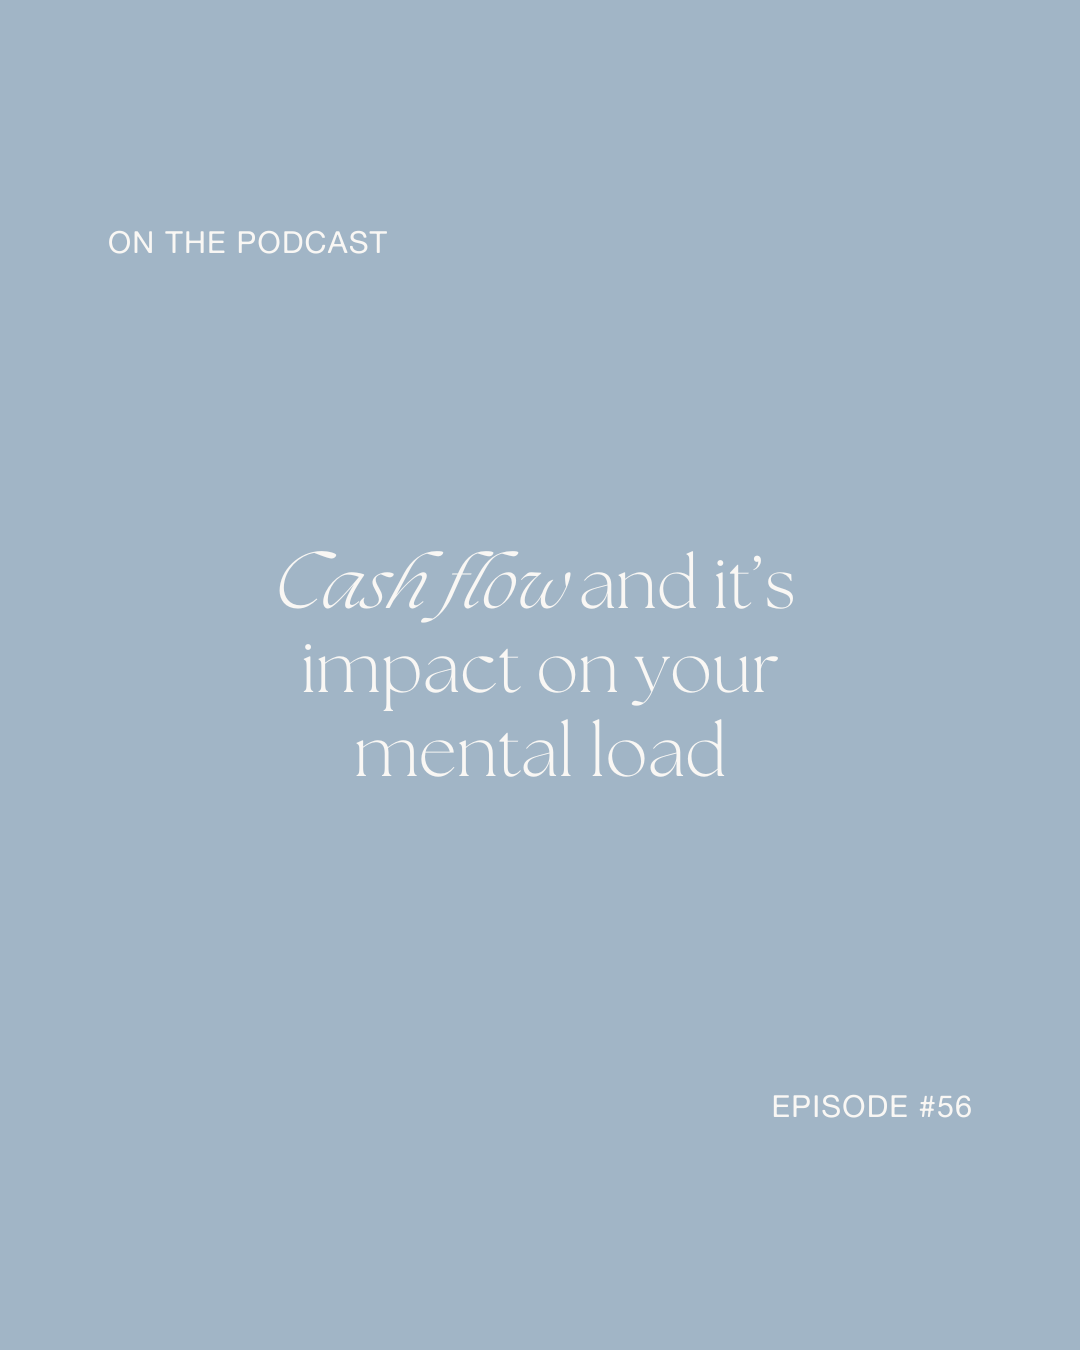 Cash flow and it's impact on your mental load